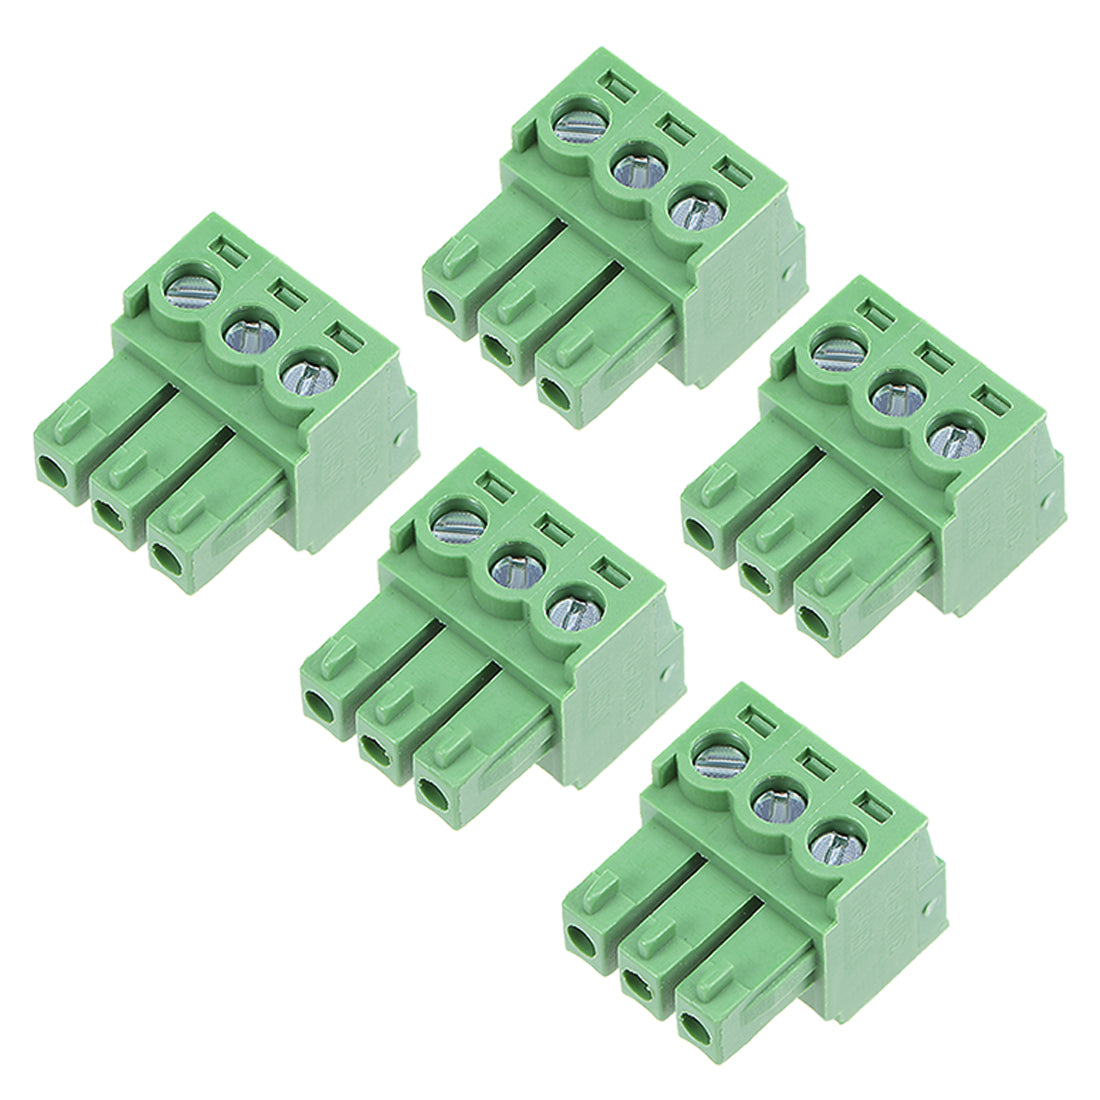 uxcell Uxcell 5Pcs AC300V 8A 3.81mm Pitch 3P Flat Angle Needle Seat Insert-In PCB Terminal Block Connector green